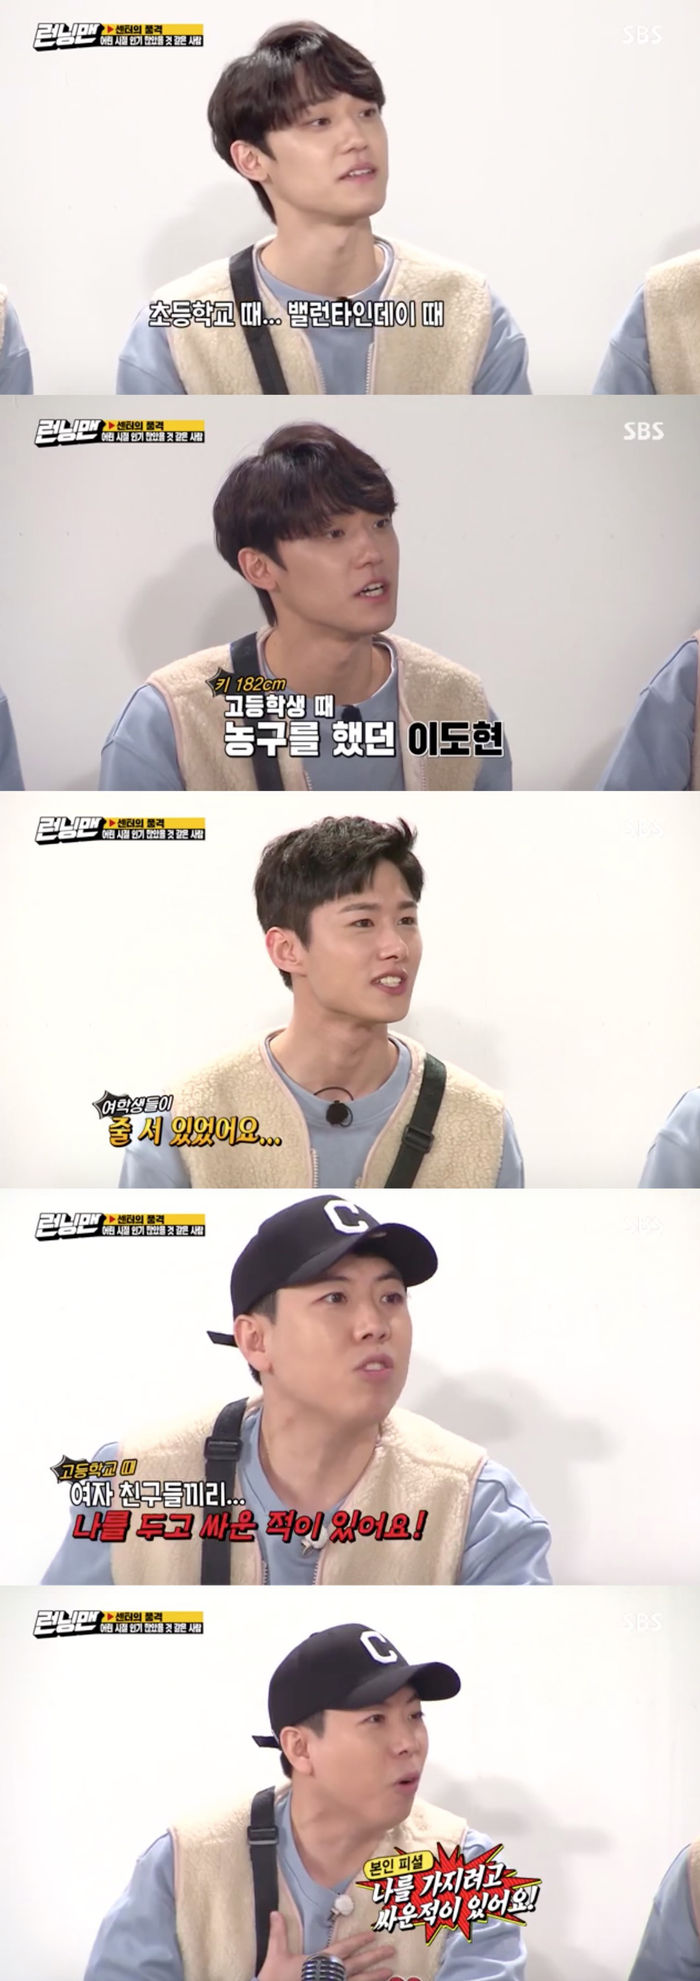 Running Man and guests spoke about their popularity during school days.On SBS Running Man broadcasted on the 29th, Running Man was shown to perform Centers Dignity Race.On this day, Running Man and the guest recalled their school days to find people who seemed to be popular during school days.Lee Do-hyun said, Can I be honest with you? I received a lot of chocolate on Valentines Day at elementary school. My mother came and took it with me.I always went out as the relay runner 4 at the athletic meet. I liked to exercise.So I played basketball when I was shooting Stoneman Douglas High School. Seo Ji-hoon also said, I was in line for three days after entering junior high school. Yoo Jae-Suk and Kim Jong-guk were surprised that there was actually a story in the drama.Zico said, I am not a popular student in my life, but after going to a school trip and doing a stage, I became popular the next day. I also staged the Rising Line of TVXQ.Yoo Jae-Suk asked, How is it for me? Yang Se-chan said, I have fought with my girlfriends during the real Stoneman Douglas High School shooting.Ive fought to have me, its real, quipped Stephanie Herseth Sandlin.Yang Se-chan said, In the end, I chose one person. Lee Kwang-soo said, The women fought and we were tied.I said that there was no winner or loser, and it disappeared. 